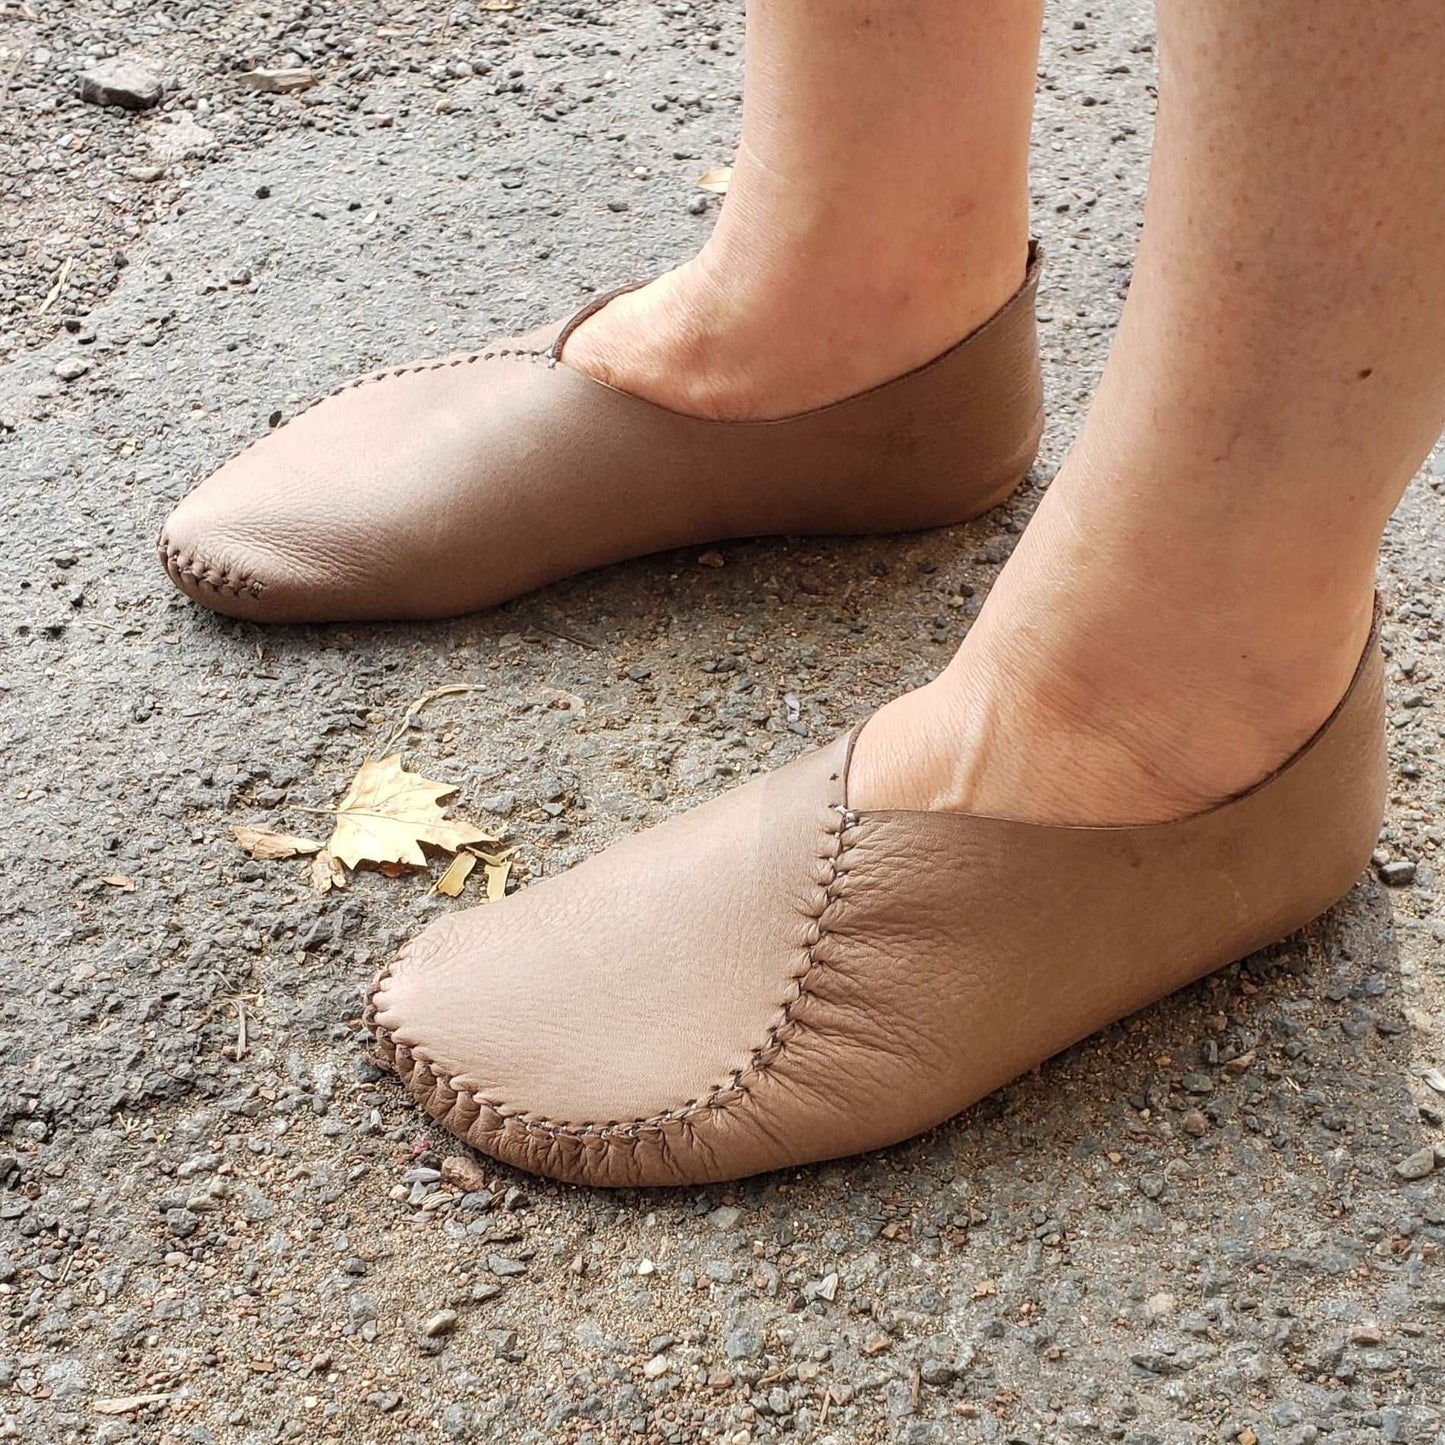 DIY Kit for Leaf Moccasins (in two colors) – Earthingmoccasins